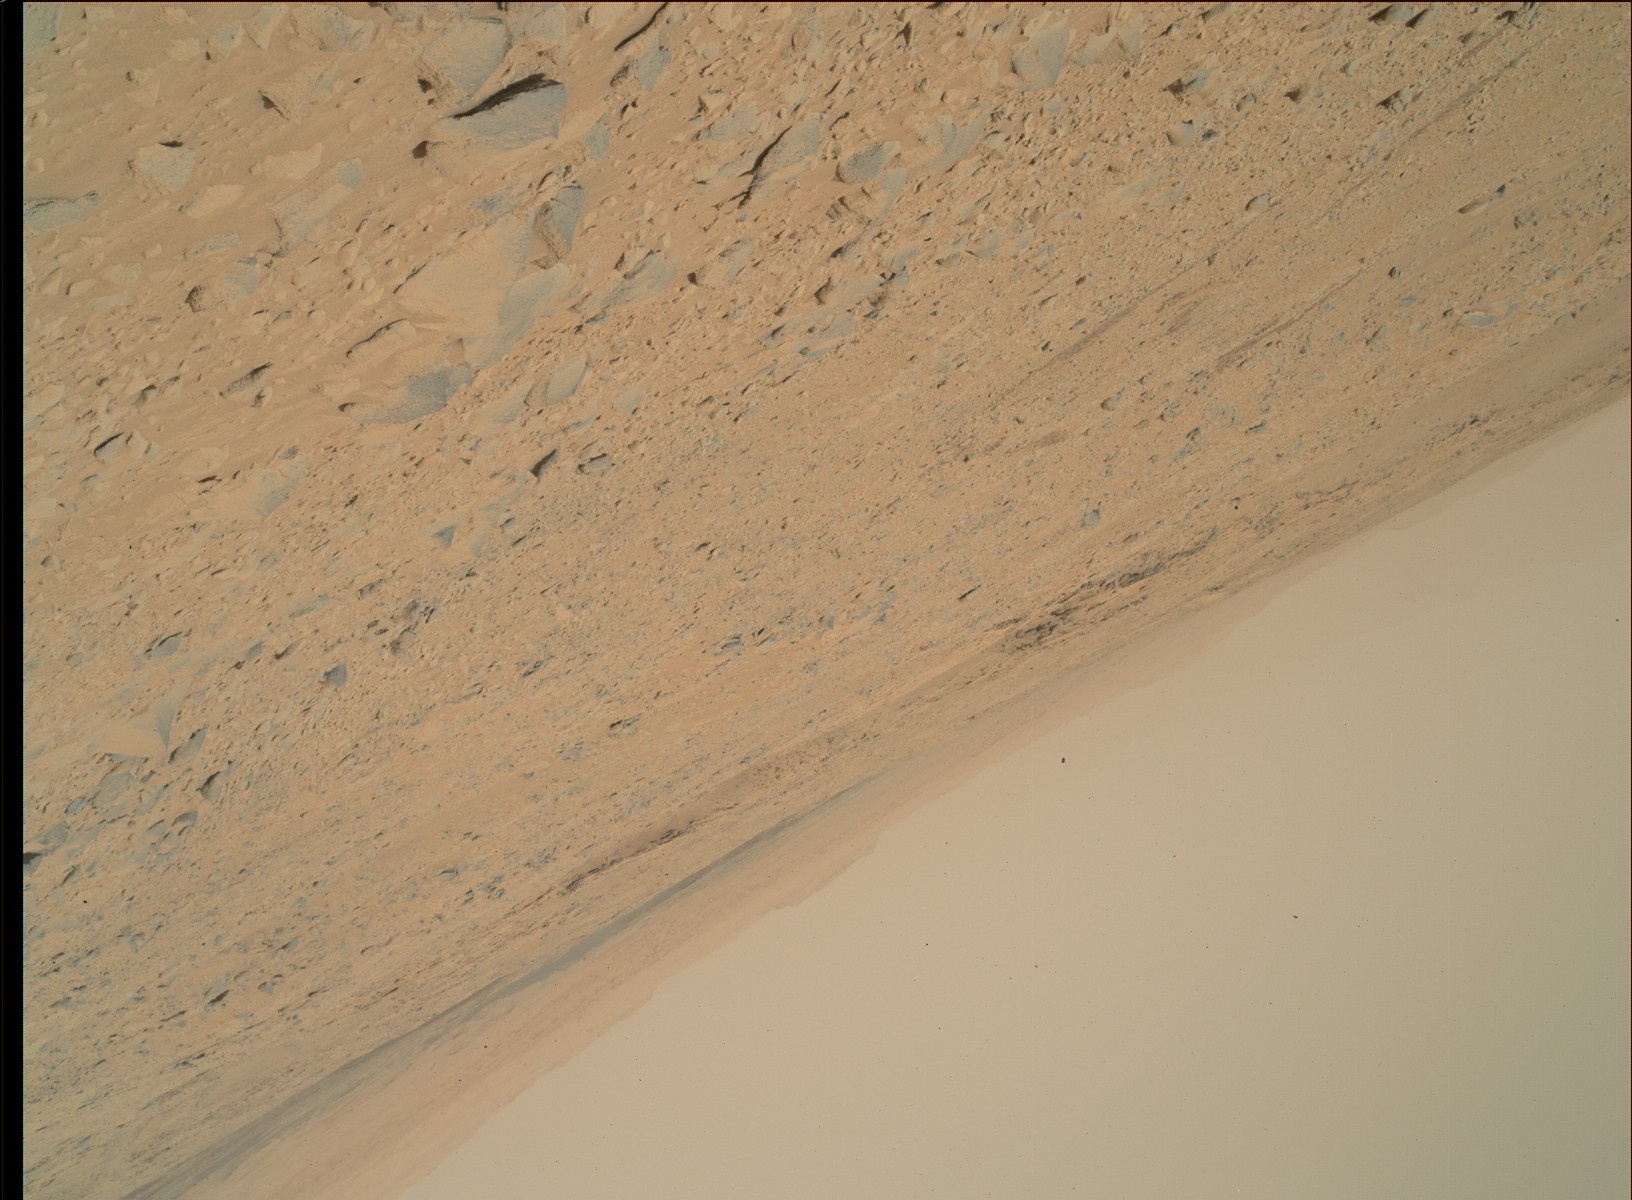 Nasa's Mars rover Curiosity acquired this image using its Mars Hand Lens Imager (MAHLI) on Sol 692